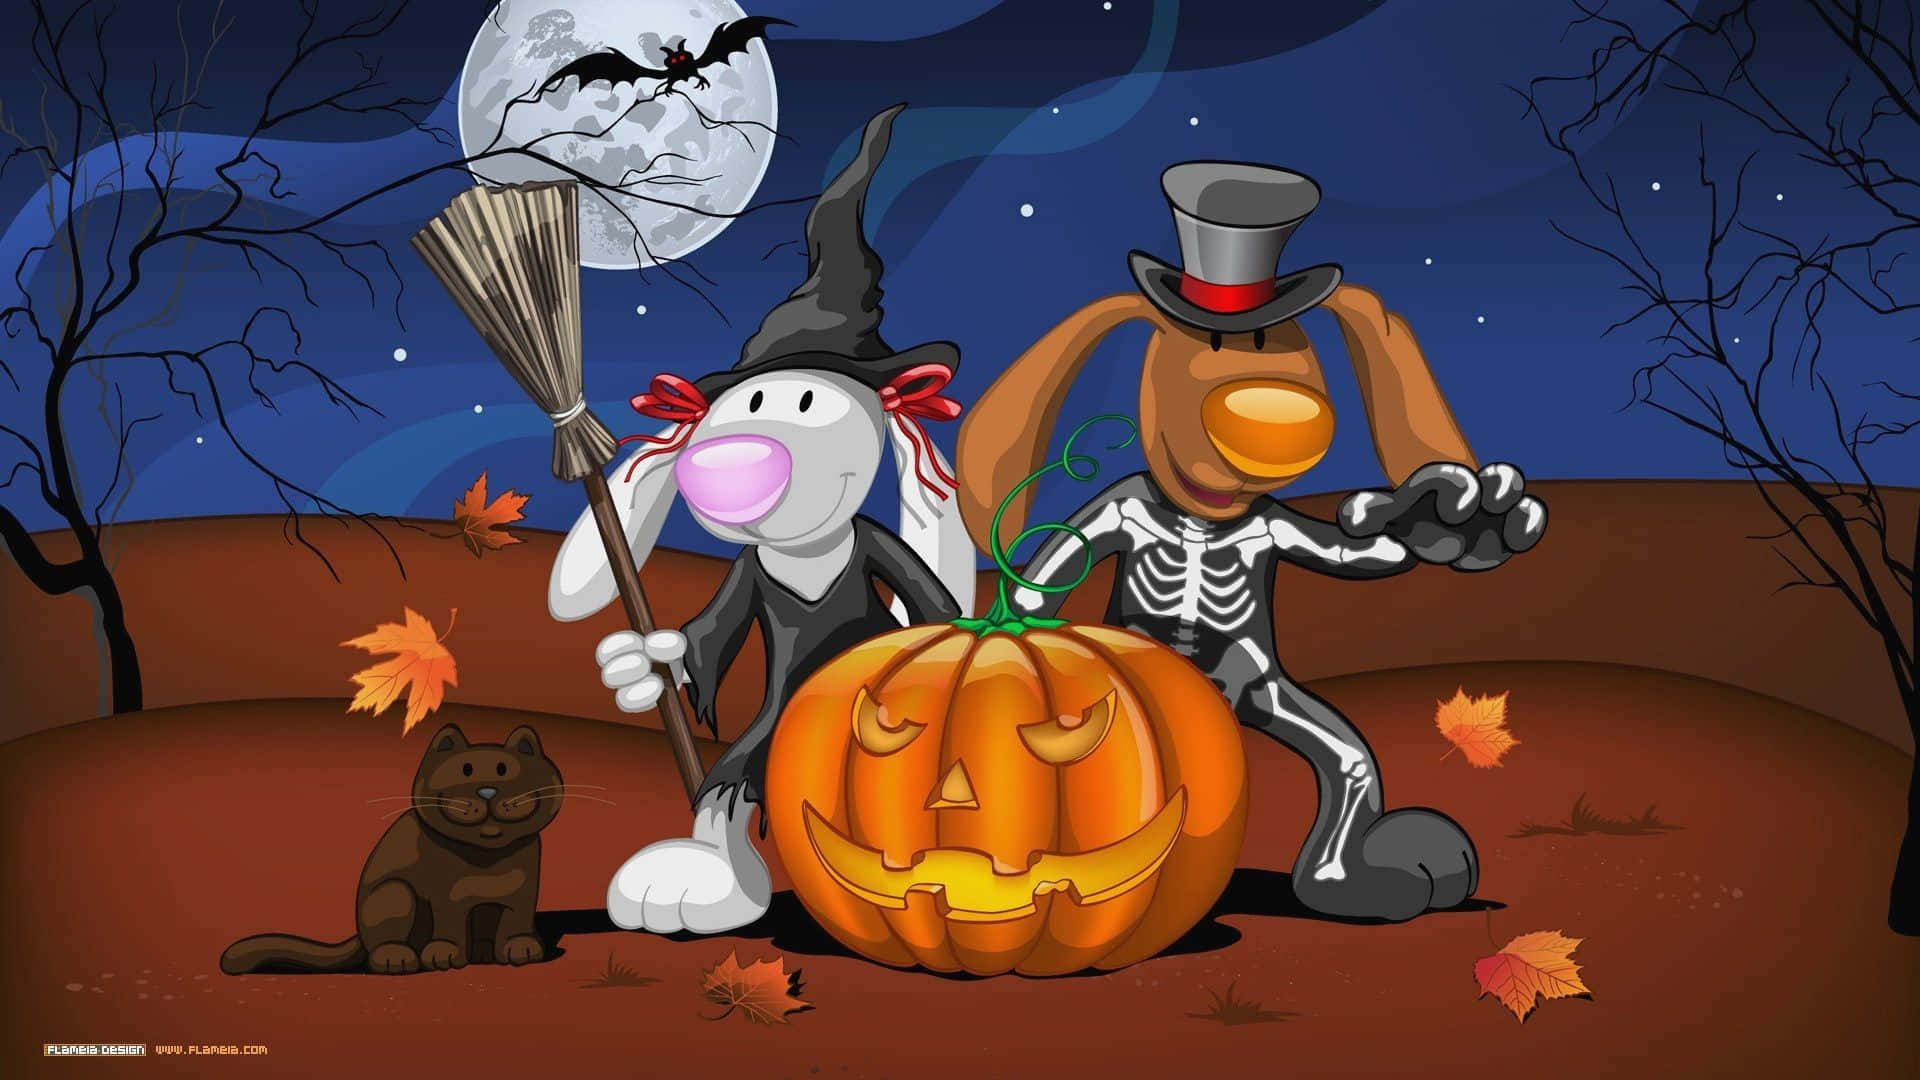 Celebrate Halloween with the Peanut's gang! Wallpaper